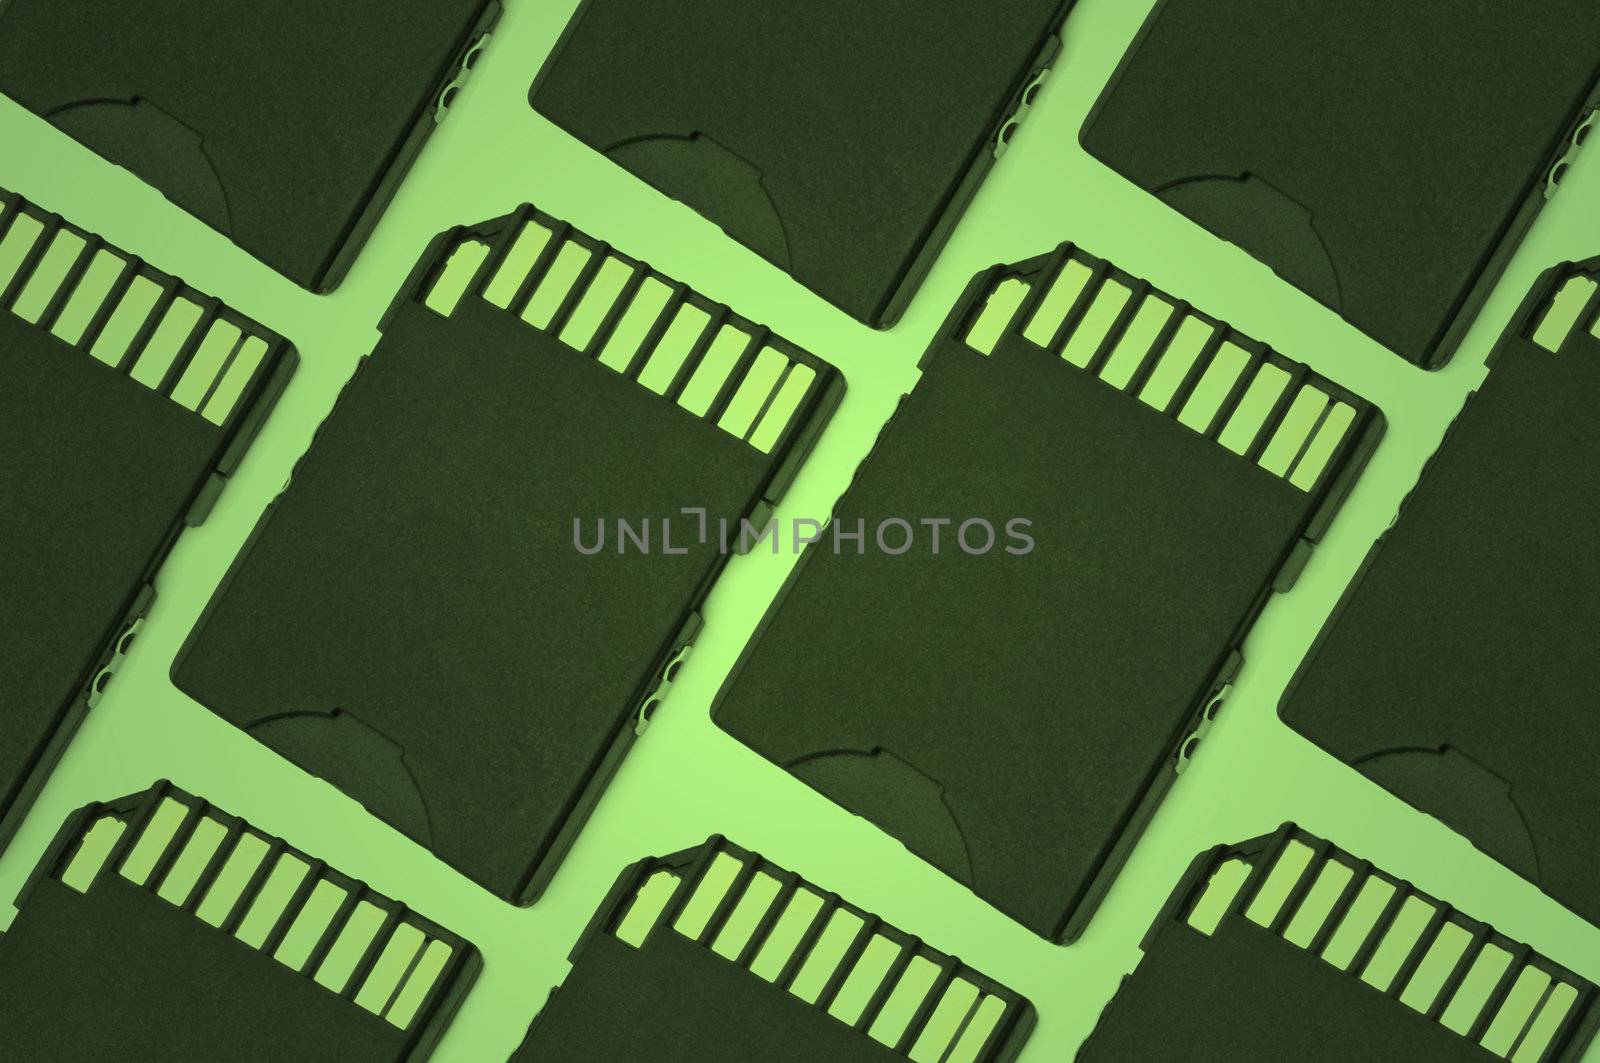 Close up on a row of black SD memory cards arranged with green filter